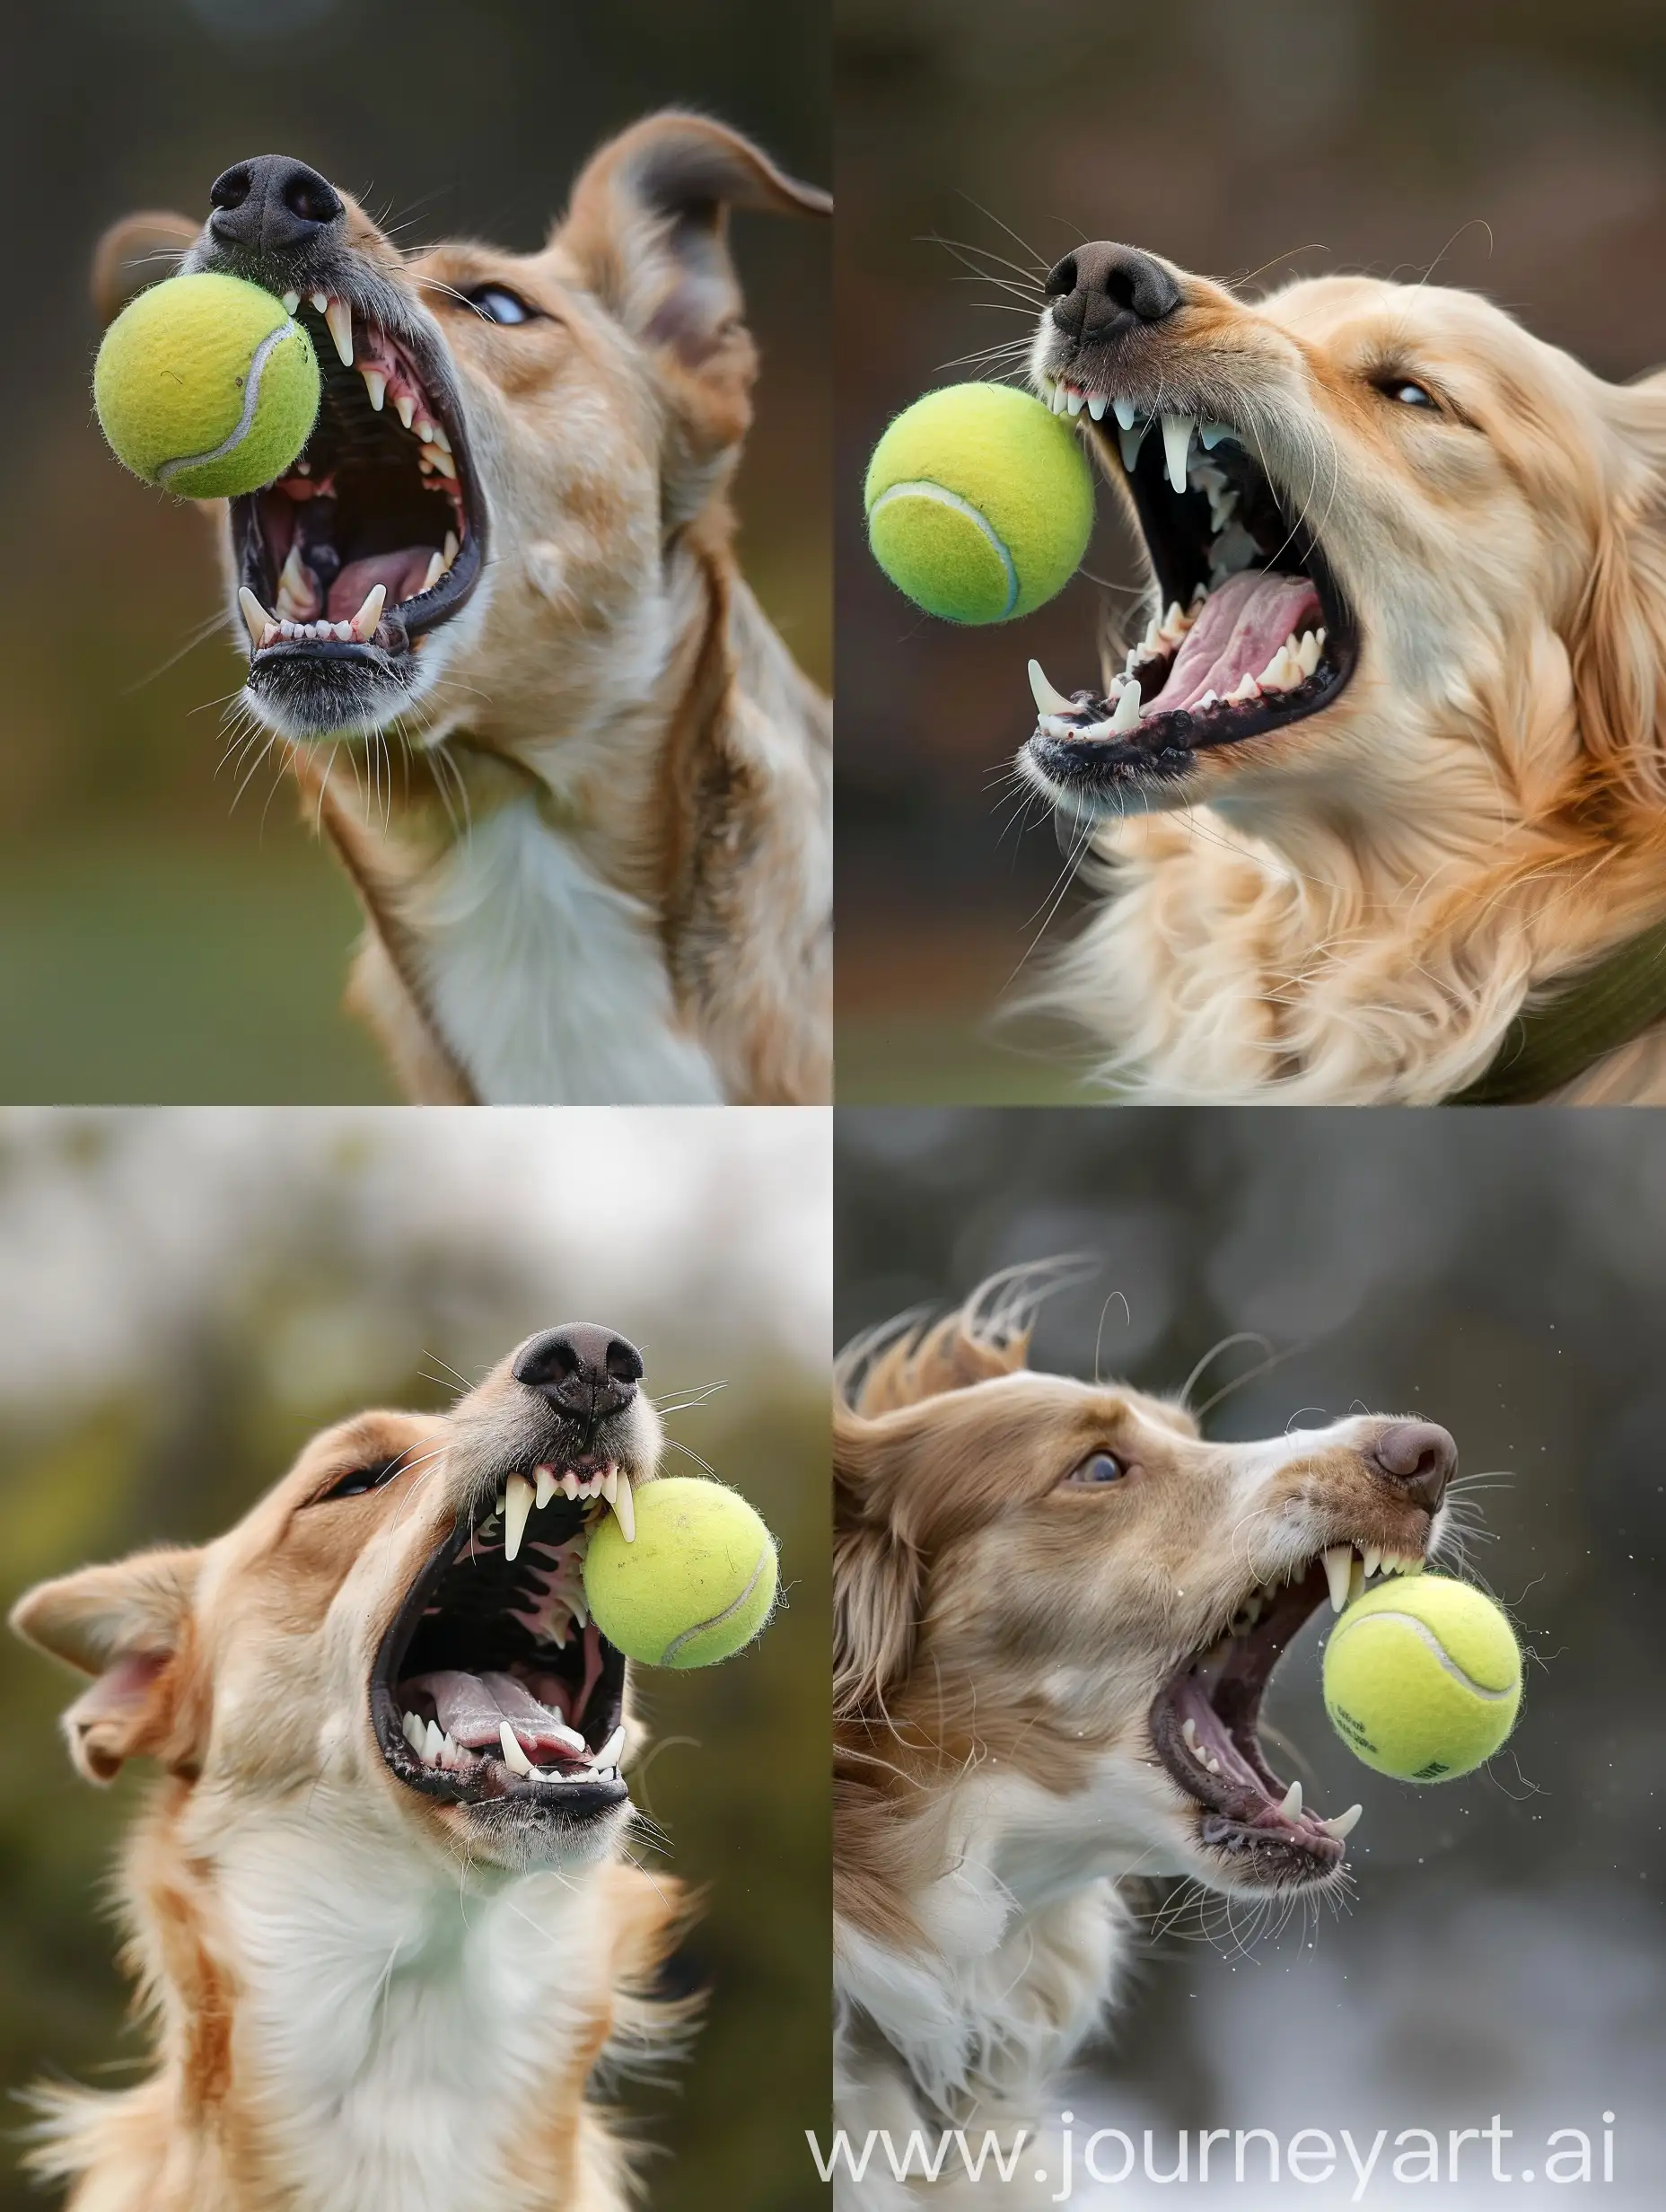 a dog catching a tennis ball with his teeth